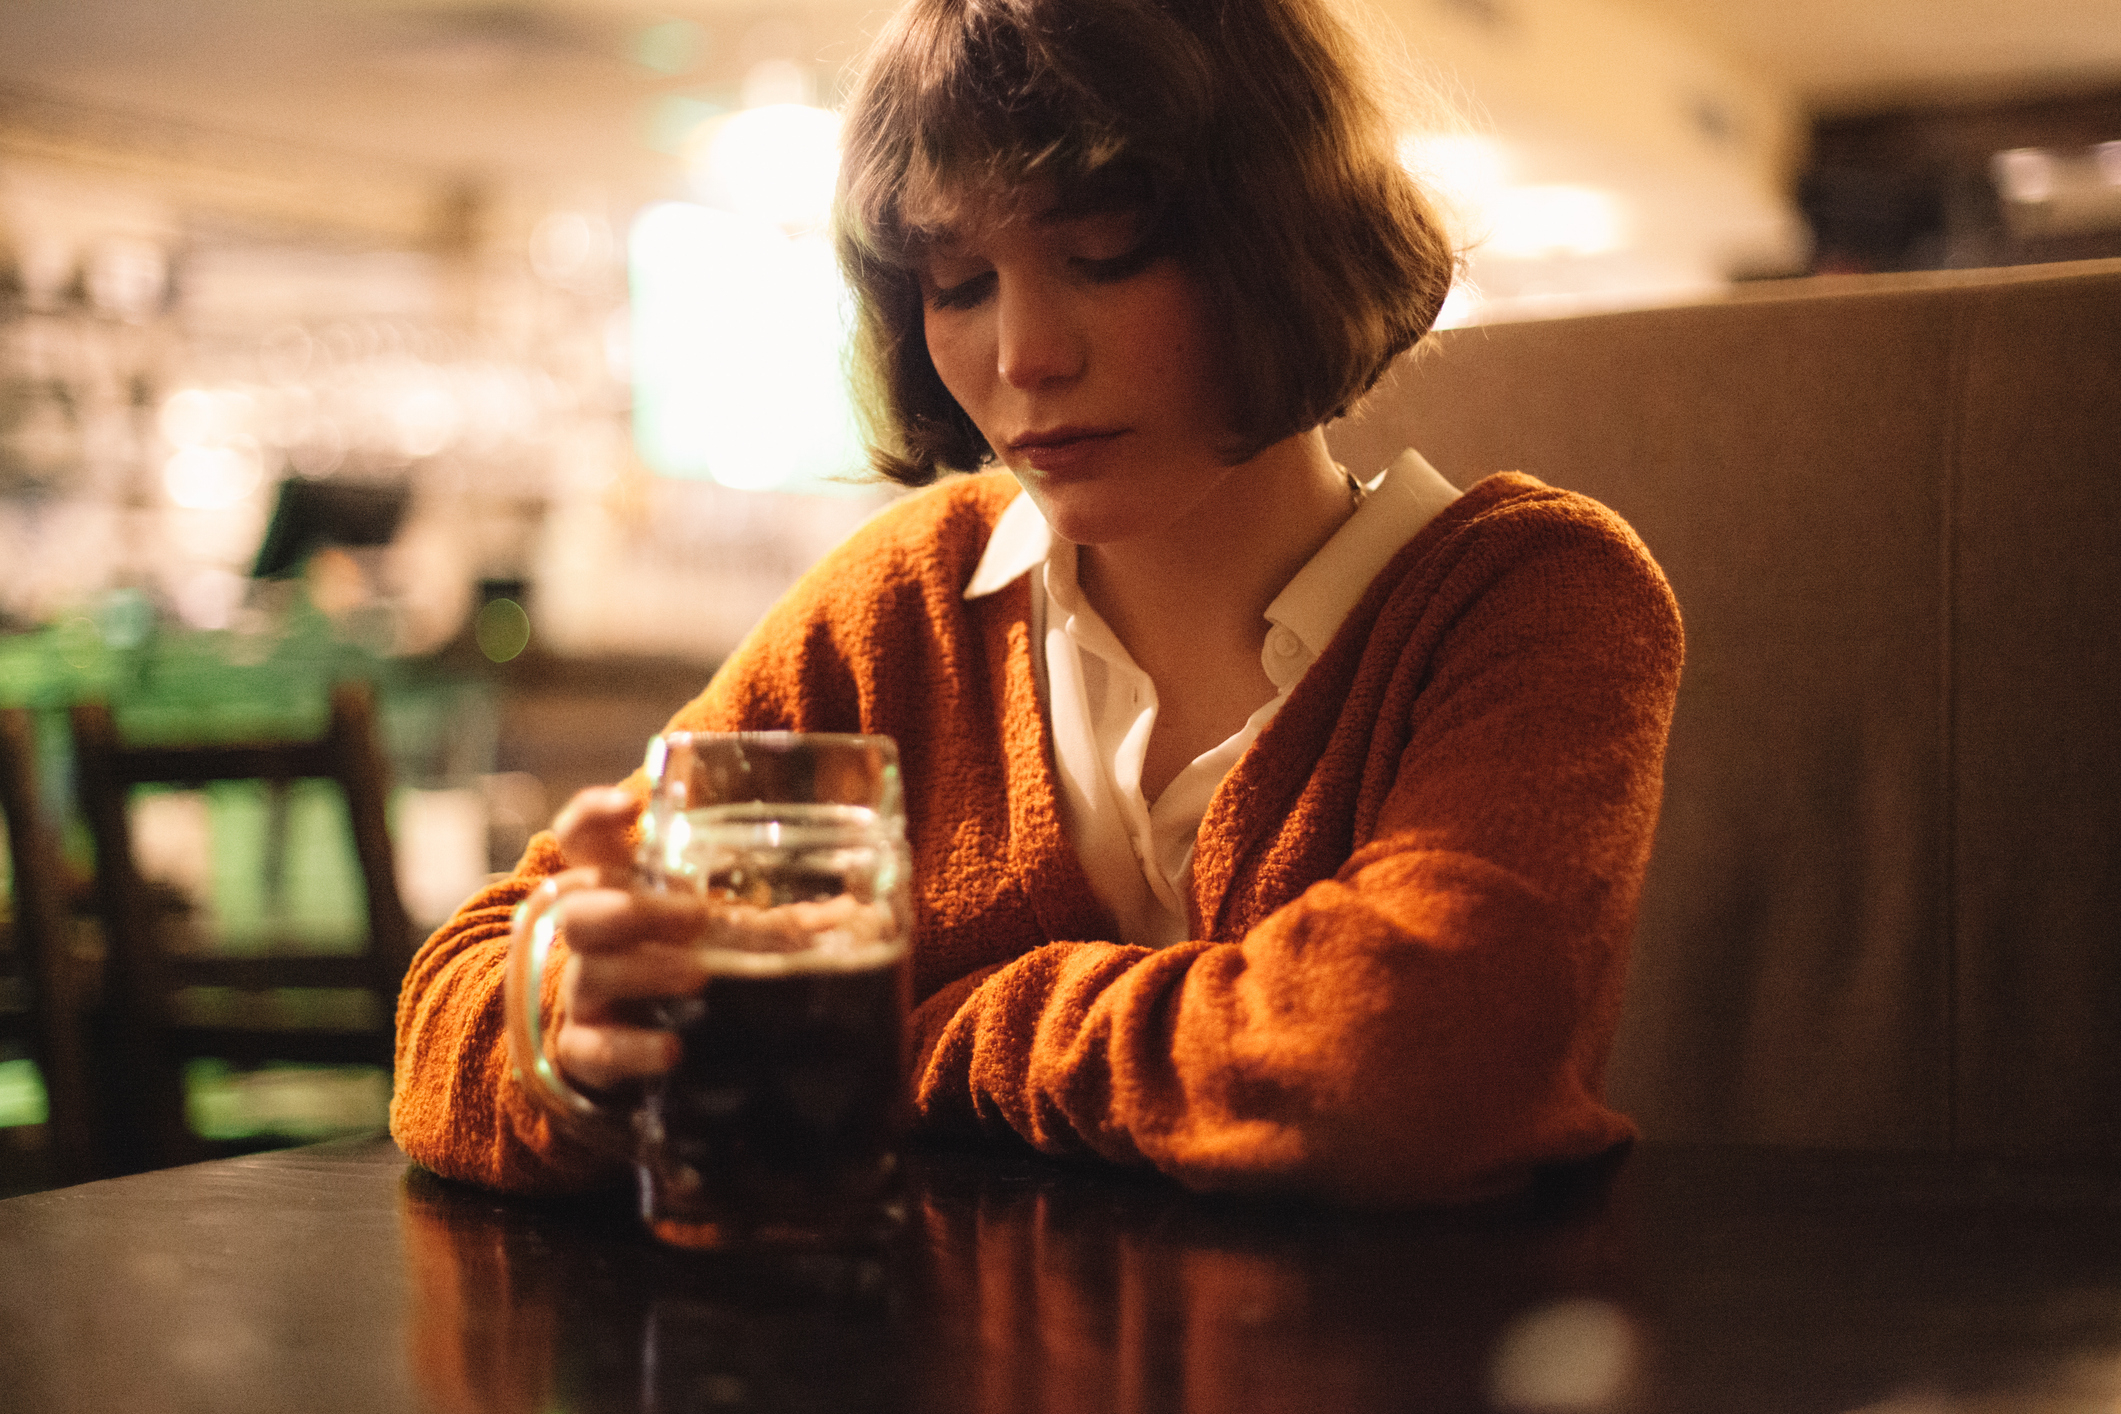 Woman in an orange cardigan holding a drink at a table, with contemplative expression